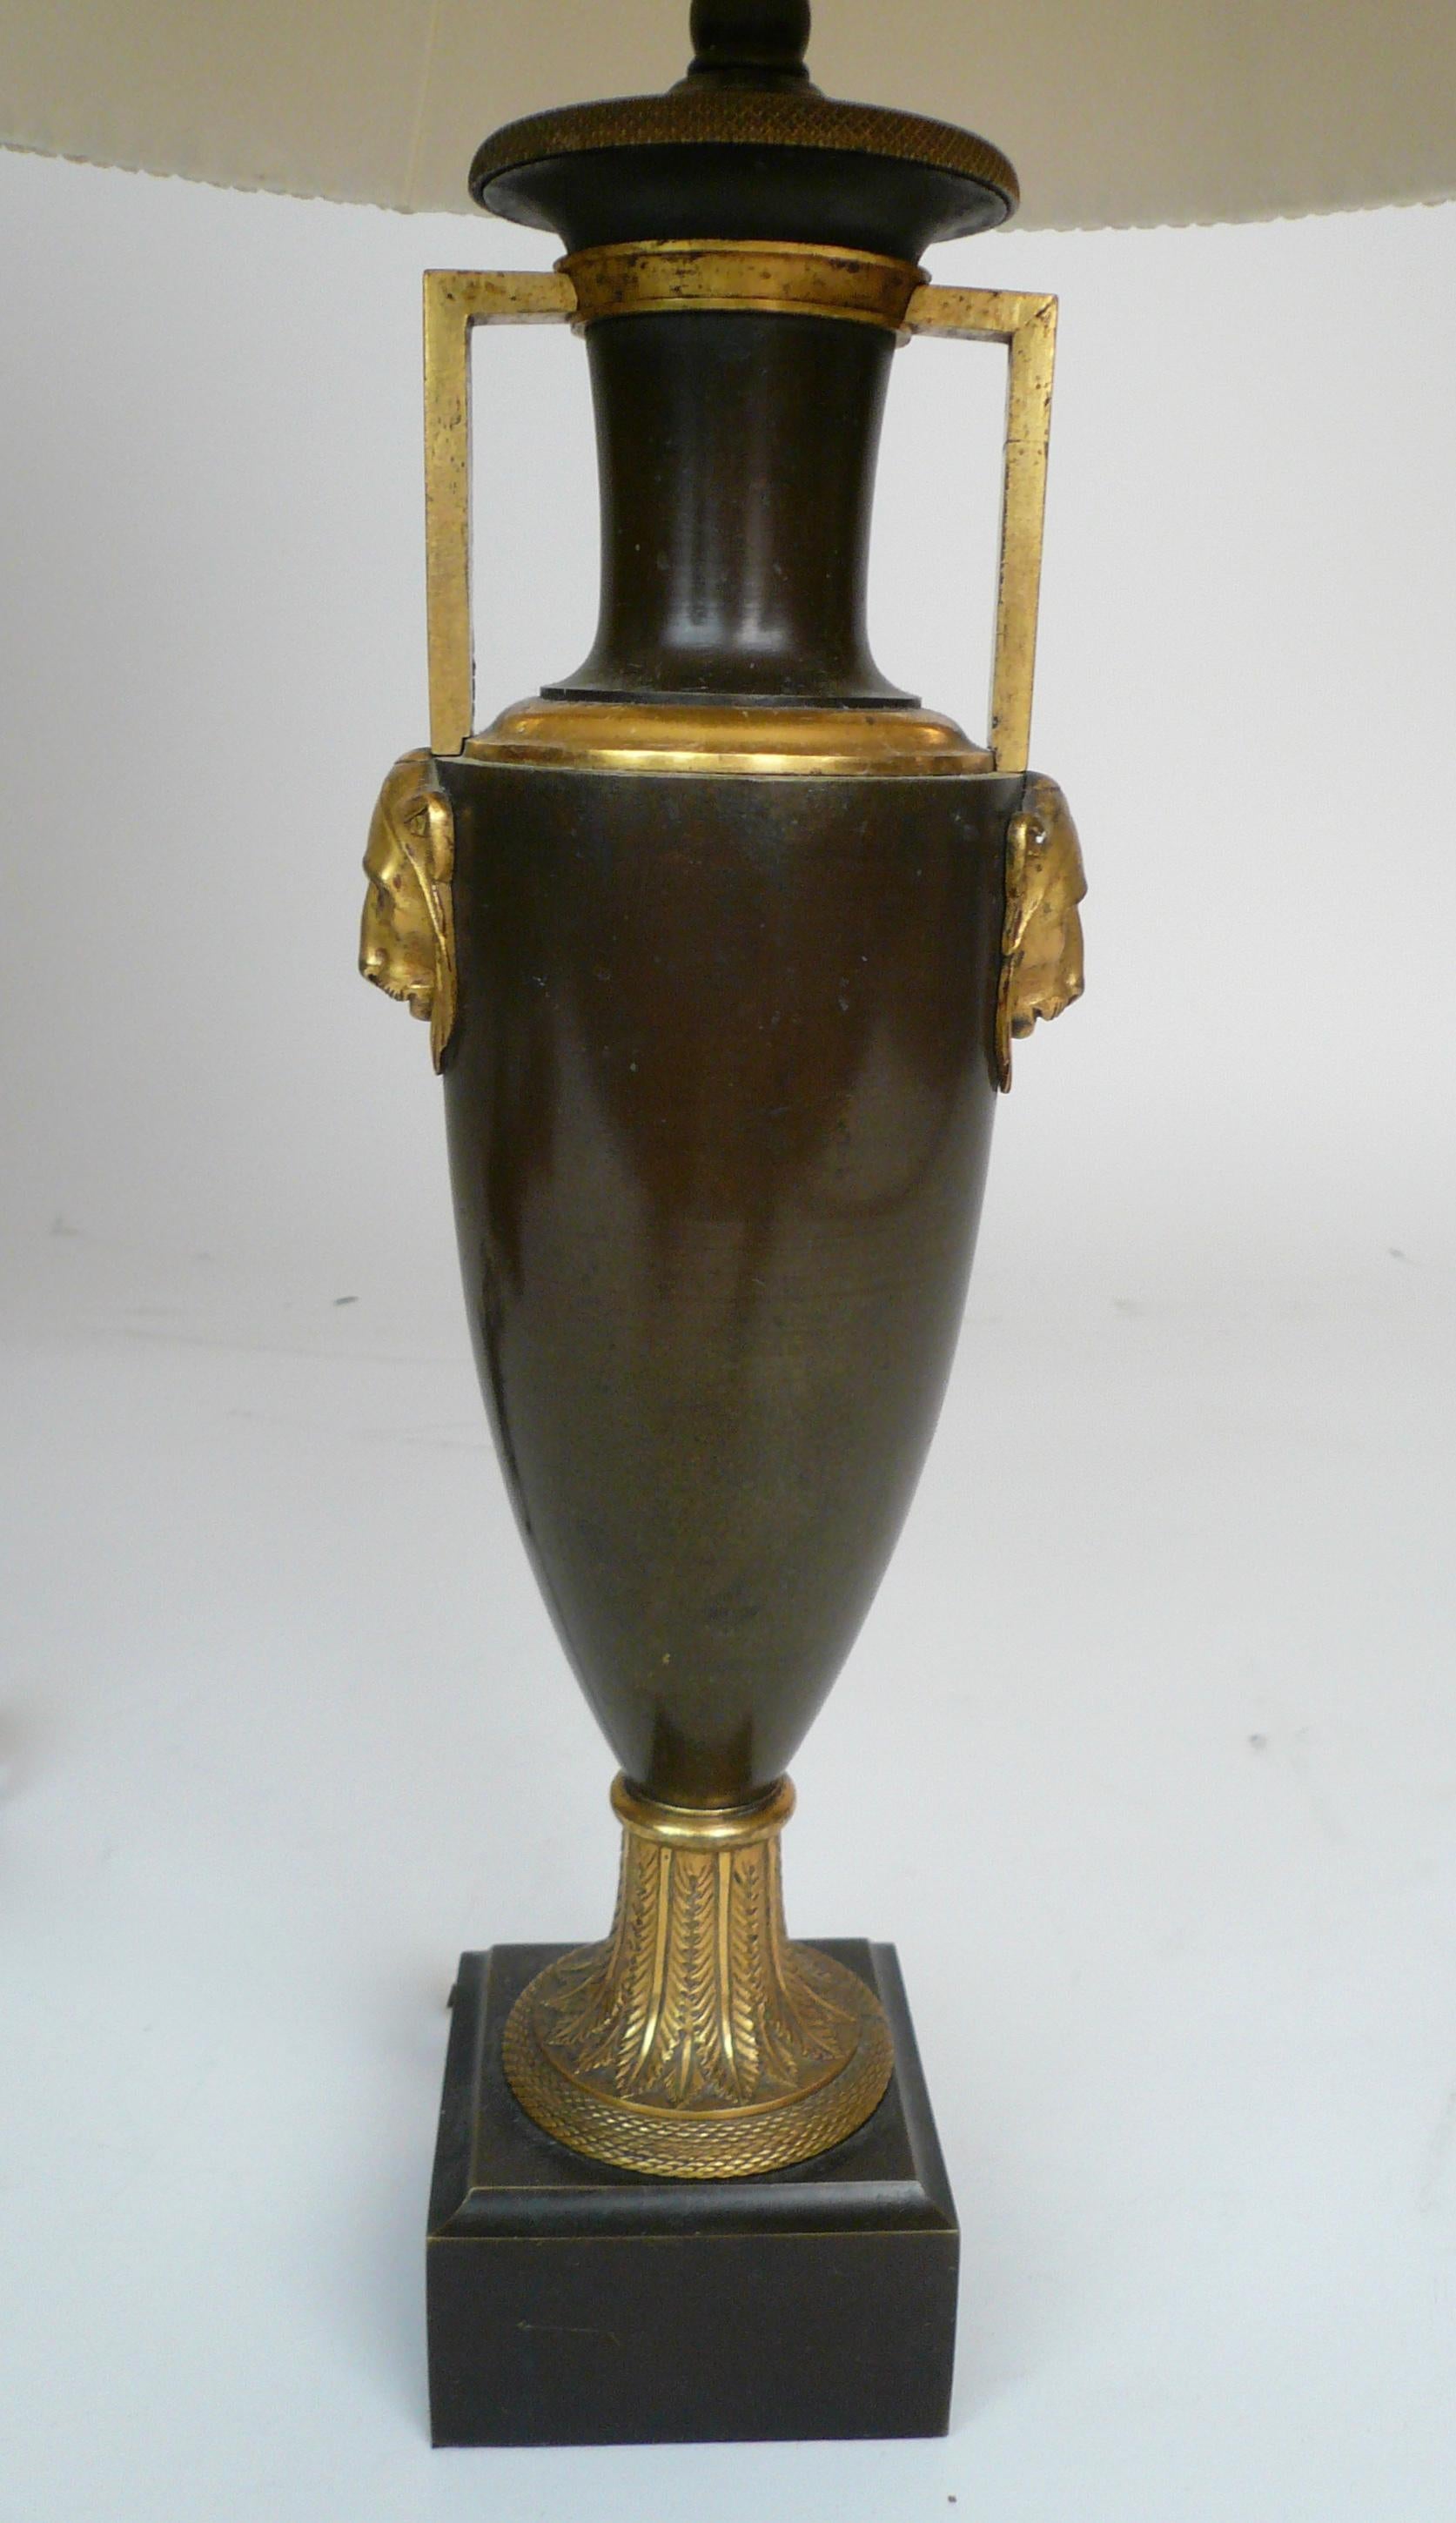 This detailed bronze urn form lamp features gilt bronze highlights including lepard head handles, and acanthus leaves.